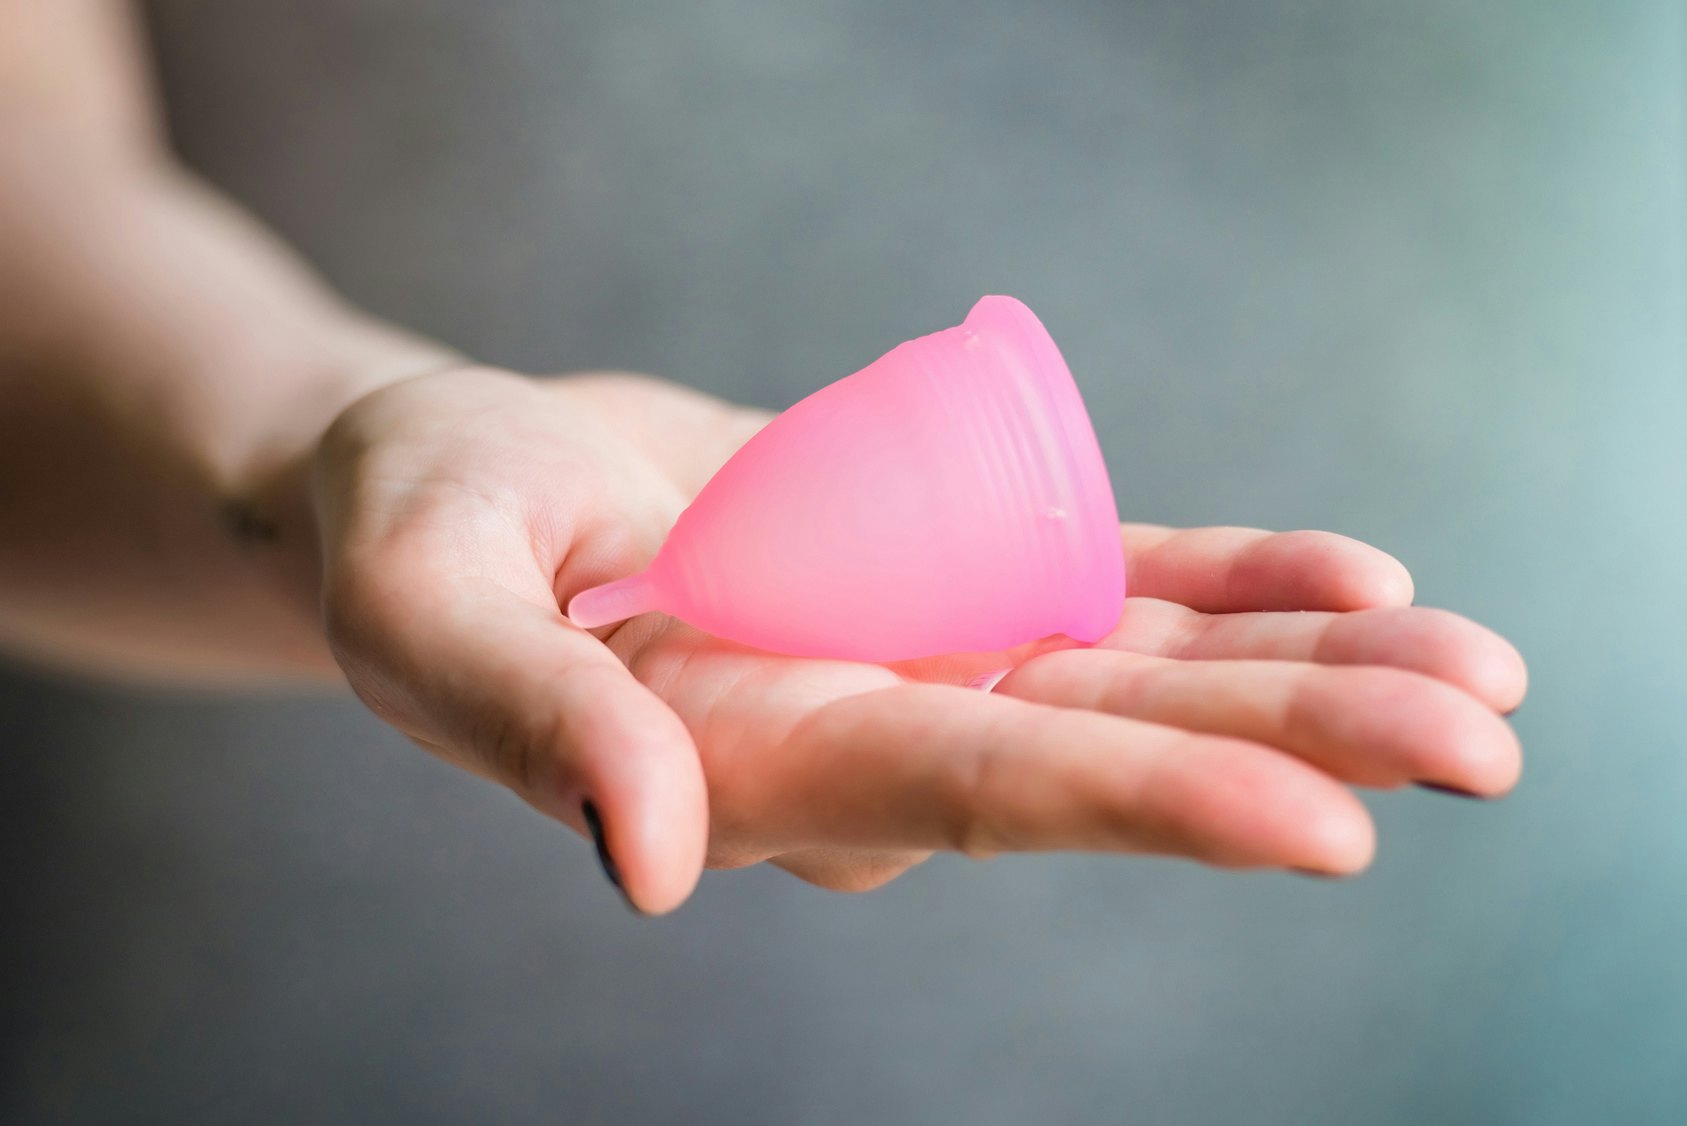 Can You Use A Menstrual Cup As A Form Of Birth Control? Not Exactly